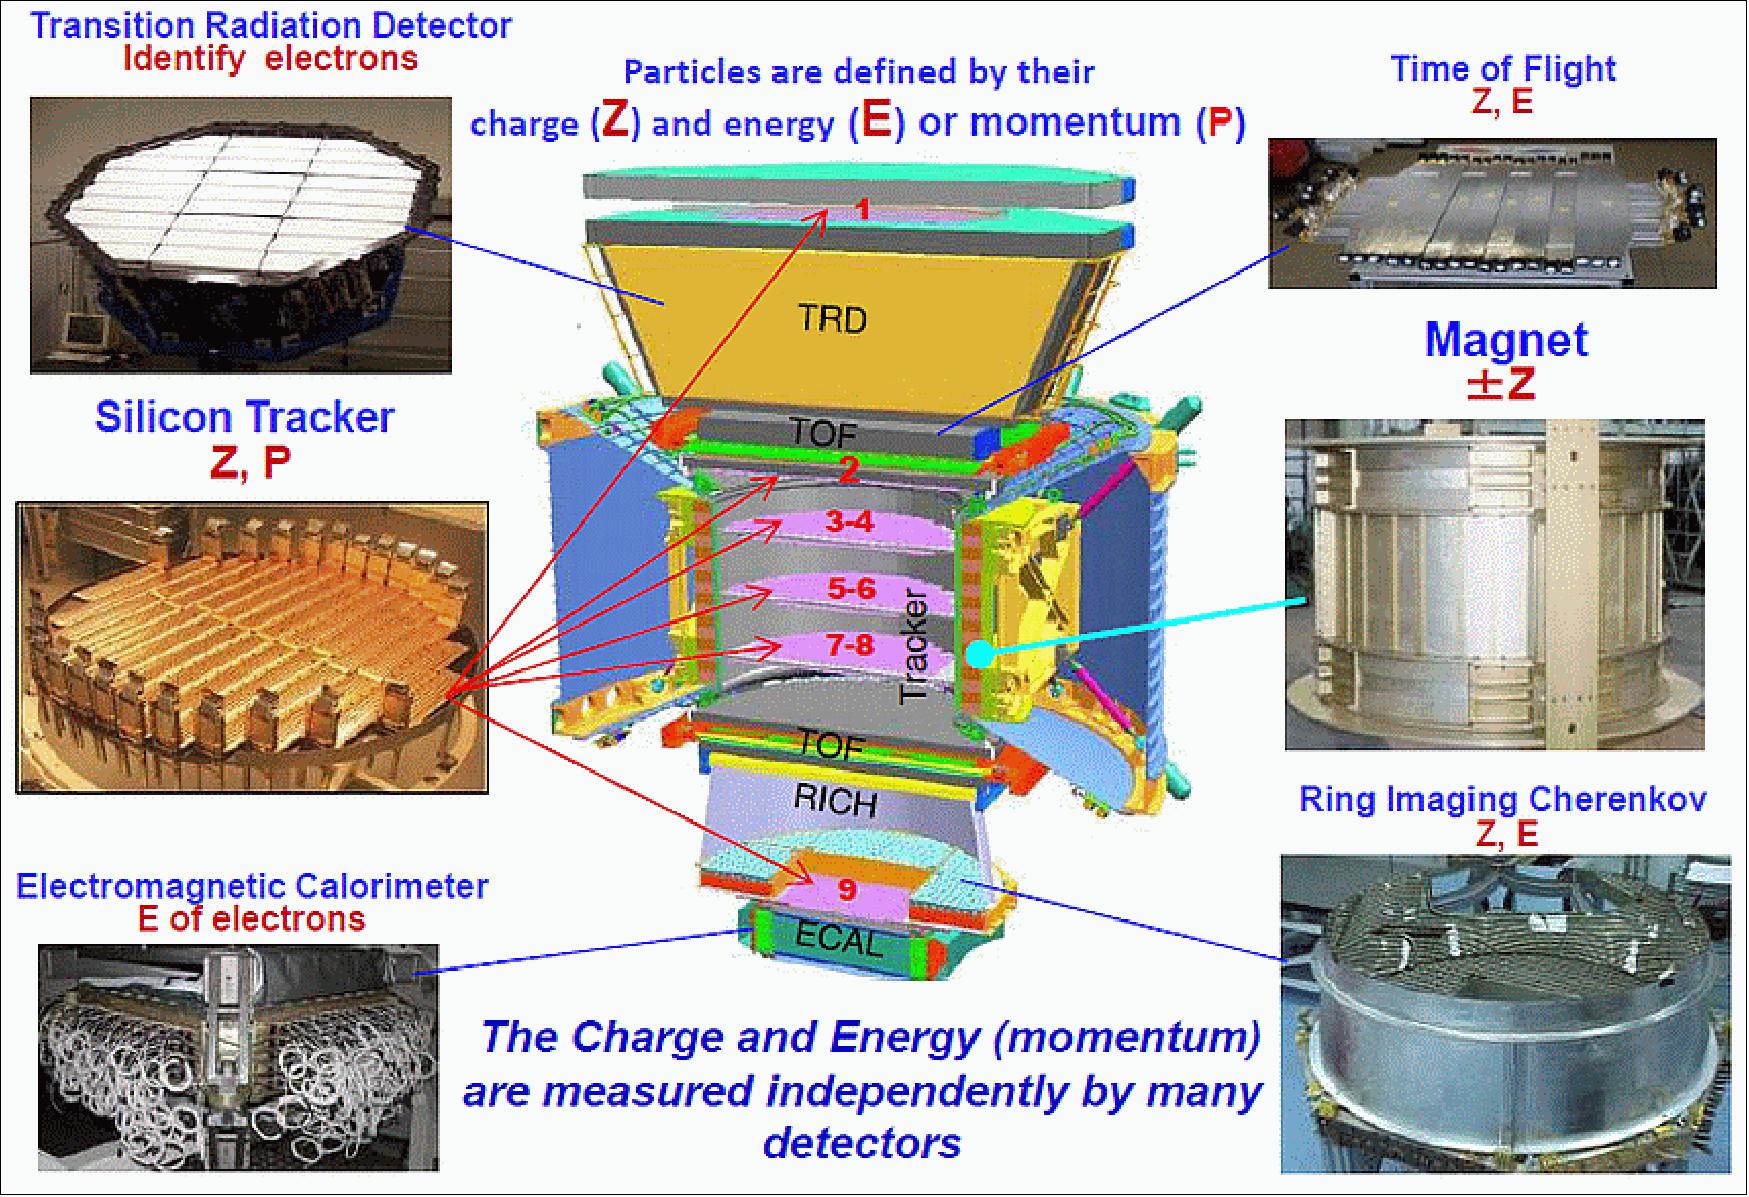 Figure 52: AMS-02, a TeV precision, multipurpose spectrometer - configuration and major components after the change to a permanent magnet (image credit: AMS Collaboration)